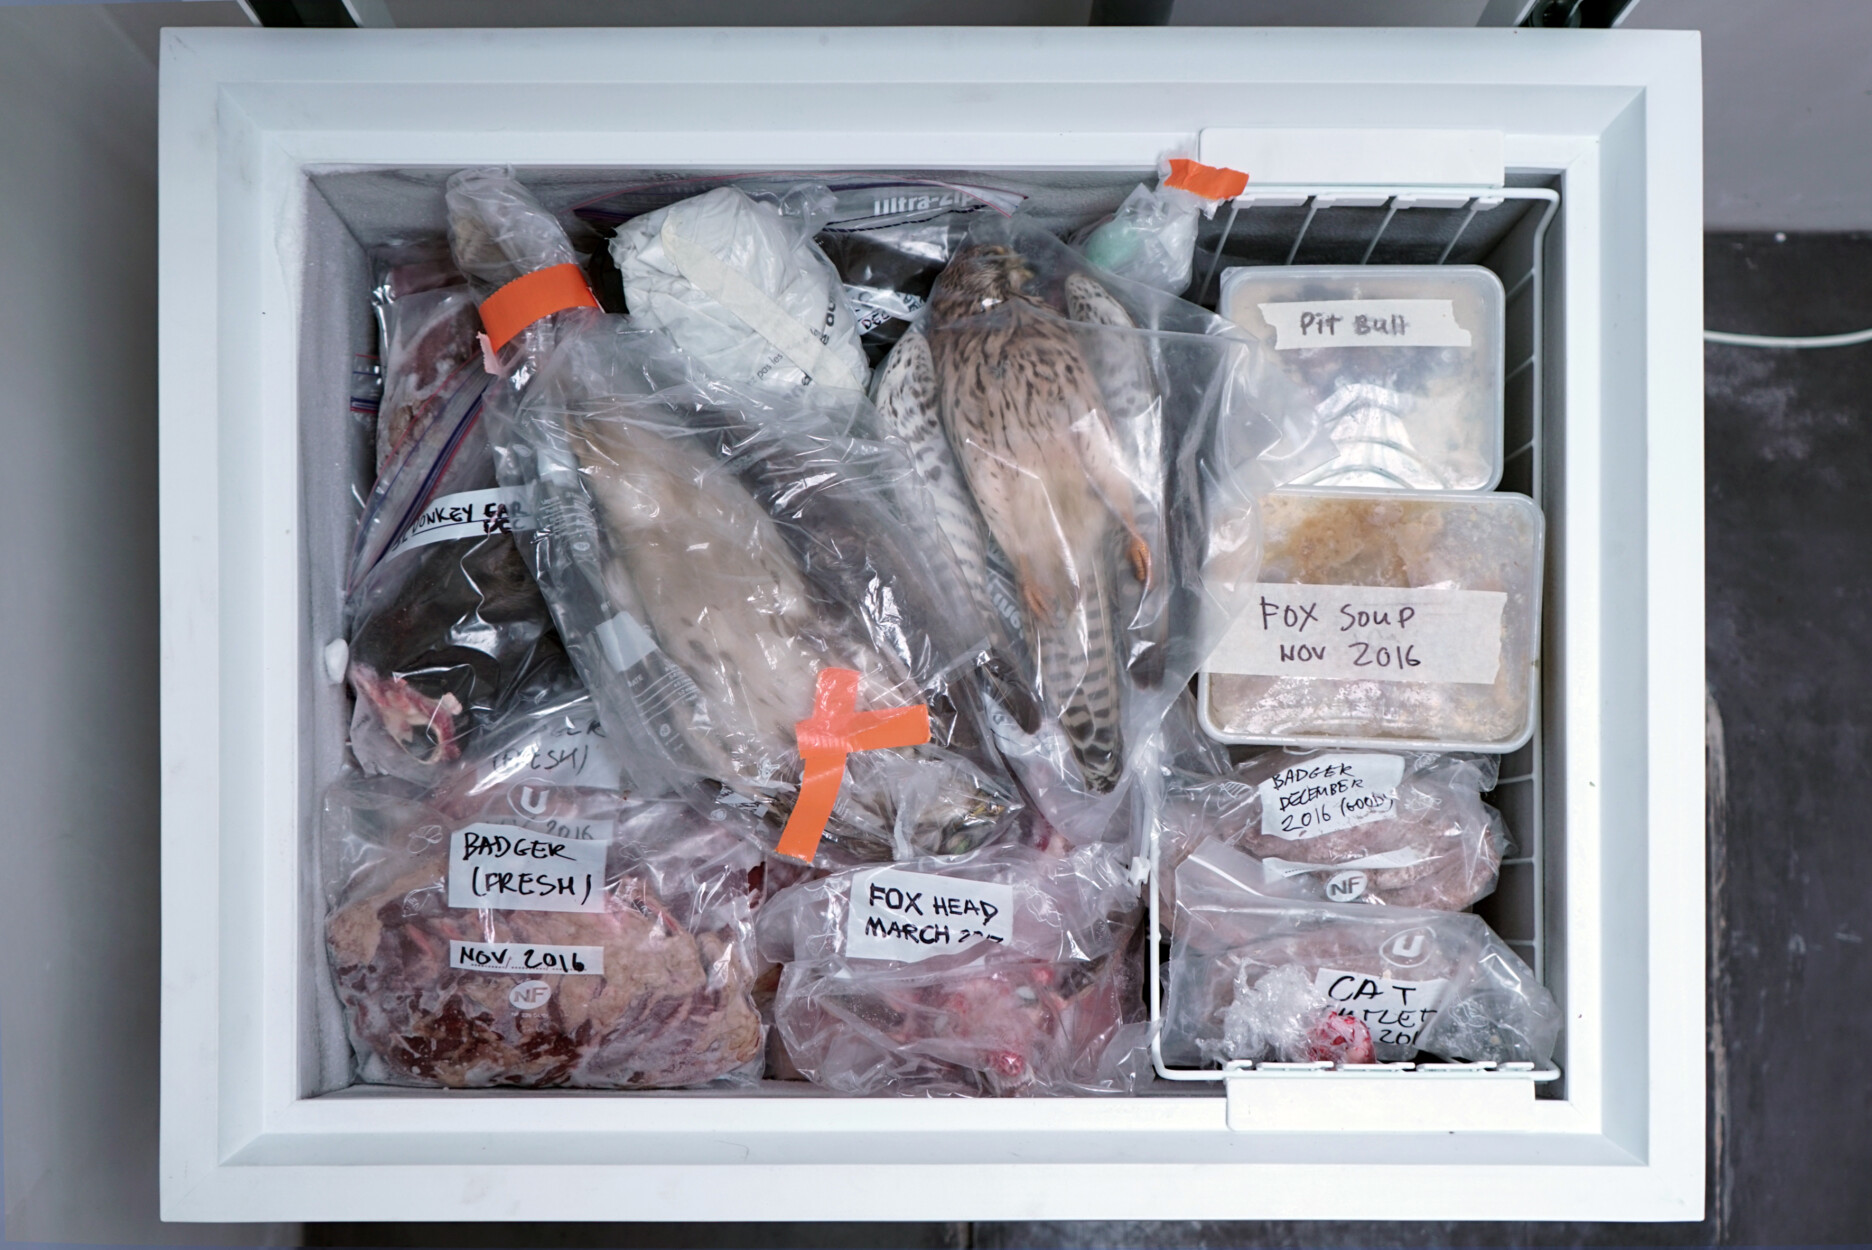 This image depicts Petr Davydtchenko's archival freezer from Go and Stop Progress. In it, you can see different boxes labelled "Fox Soup", "Pit Bull", "Fox Head", "Badger (fresh)", "Cat".